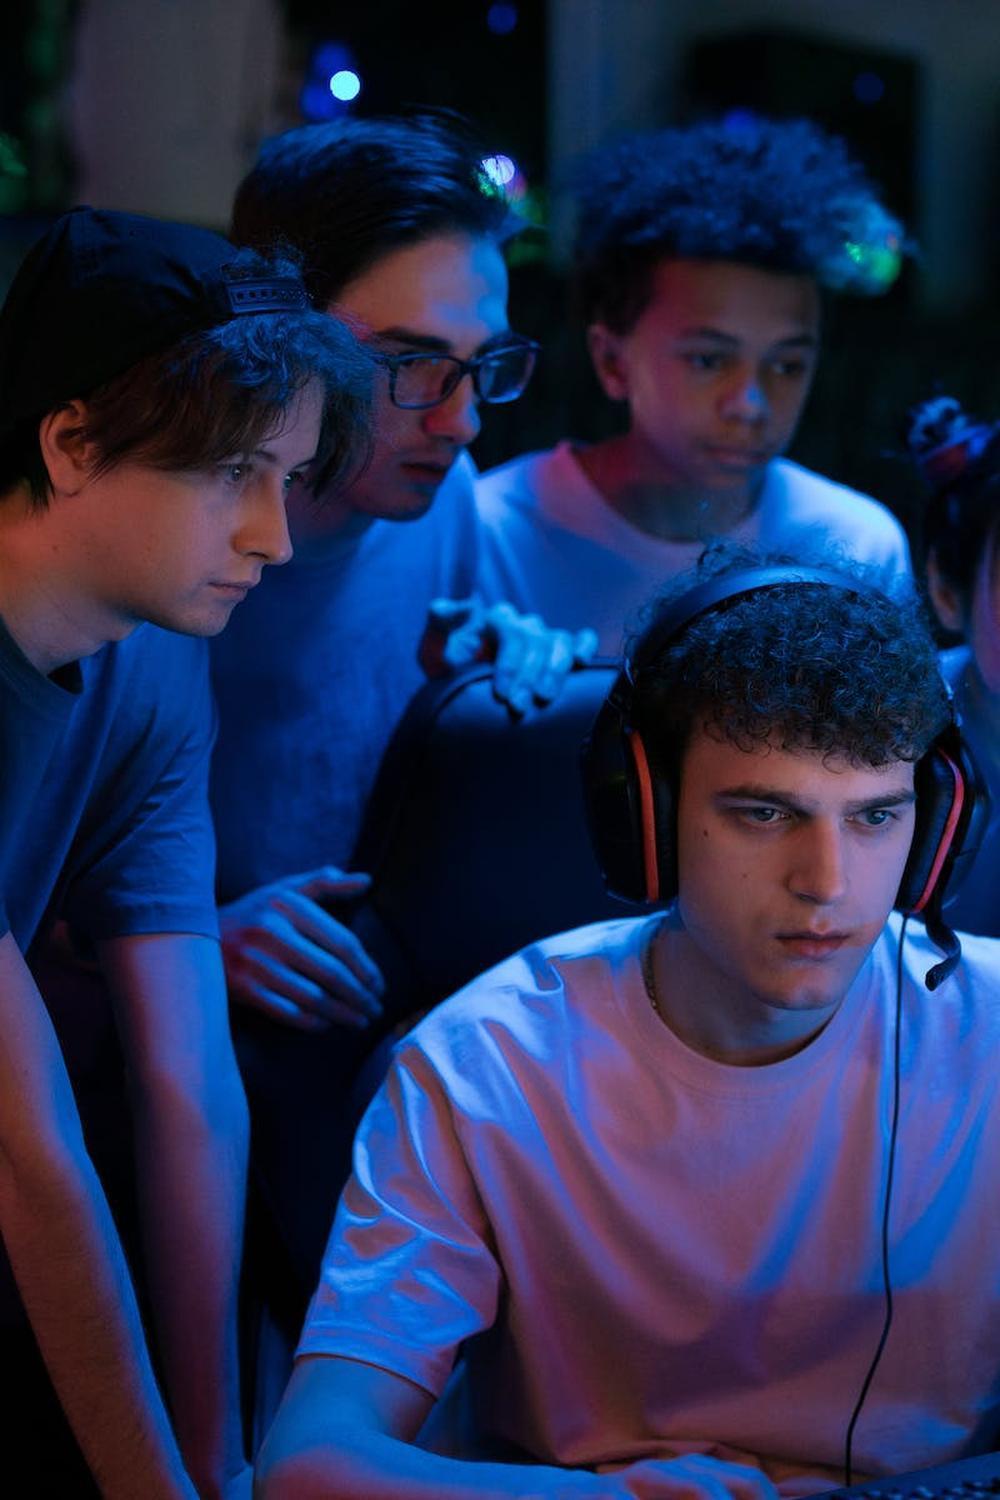 group_of_teenagers_watching_a_man_play_game_on_com